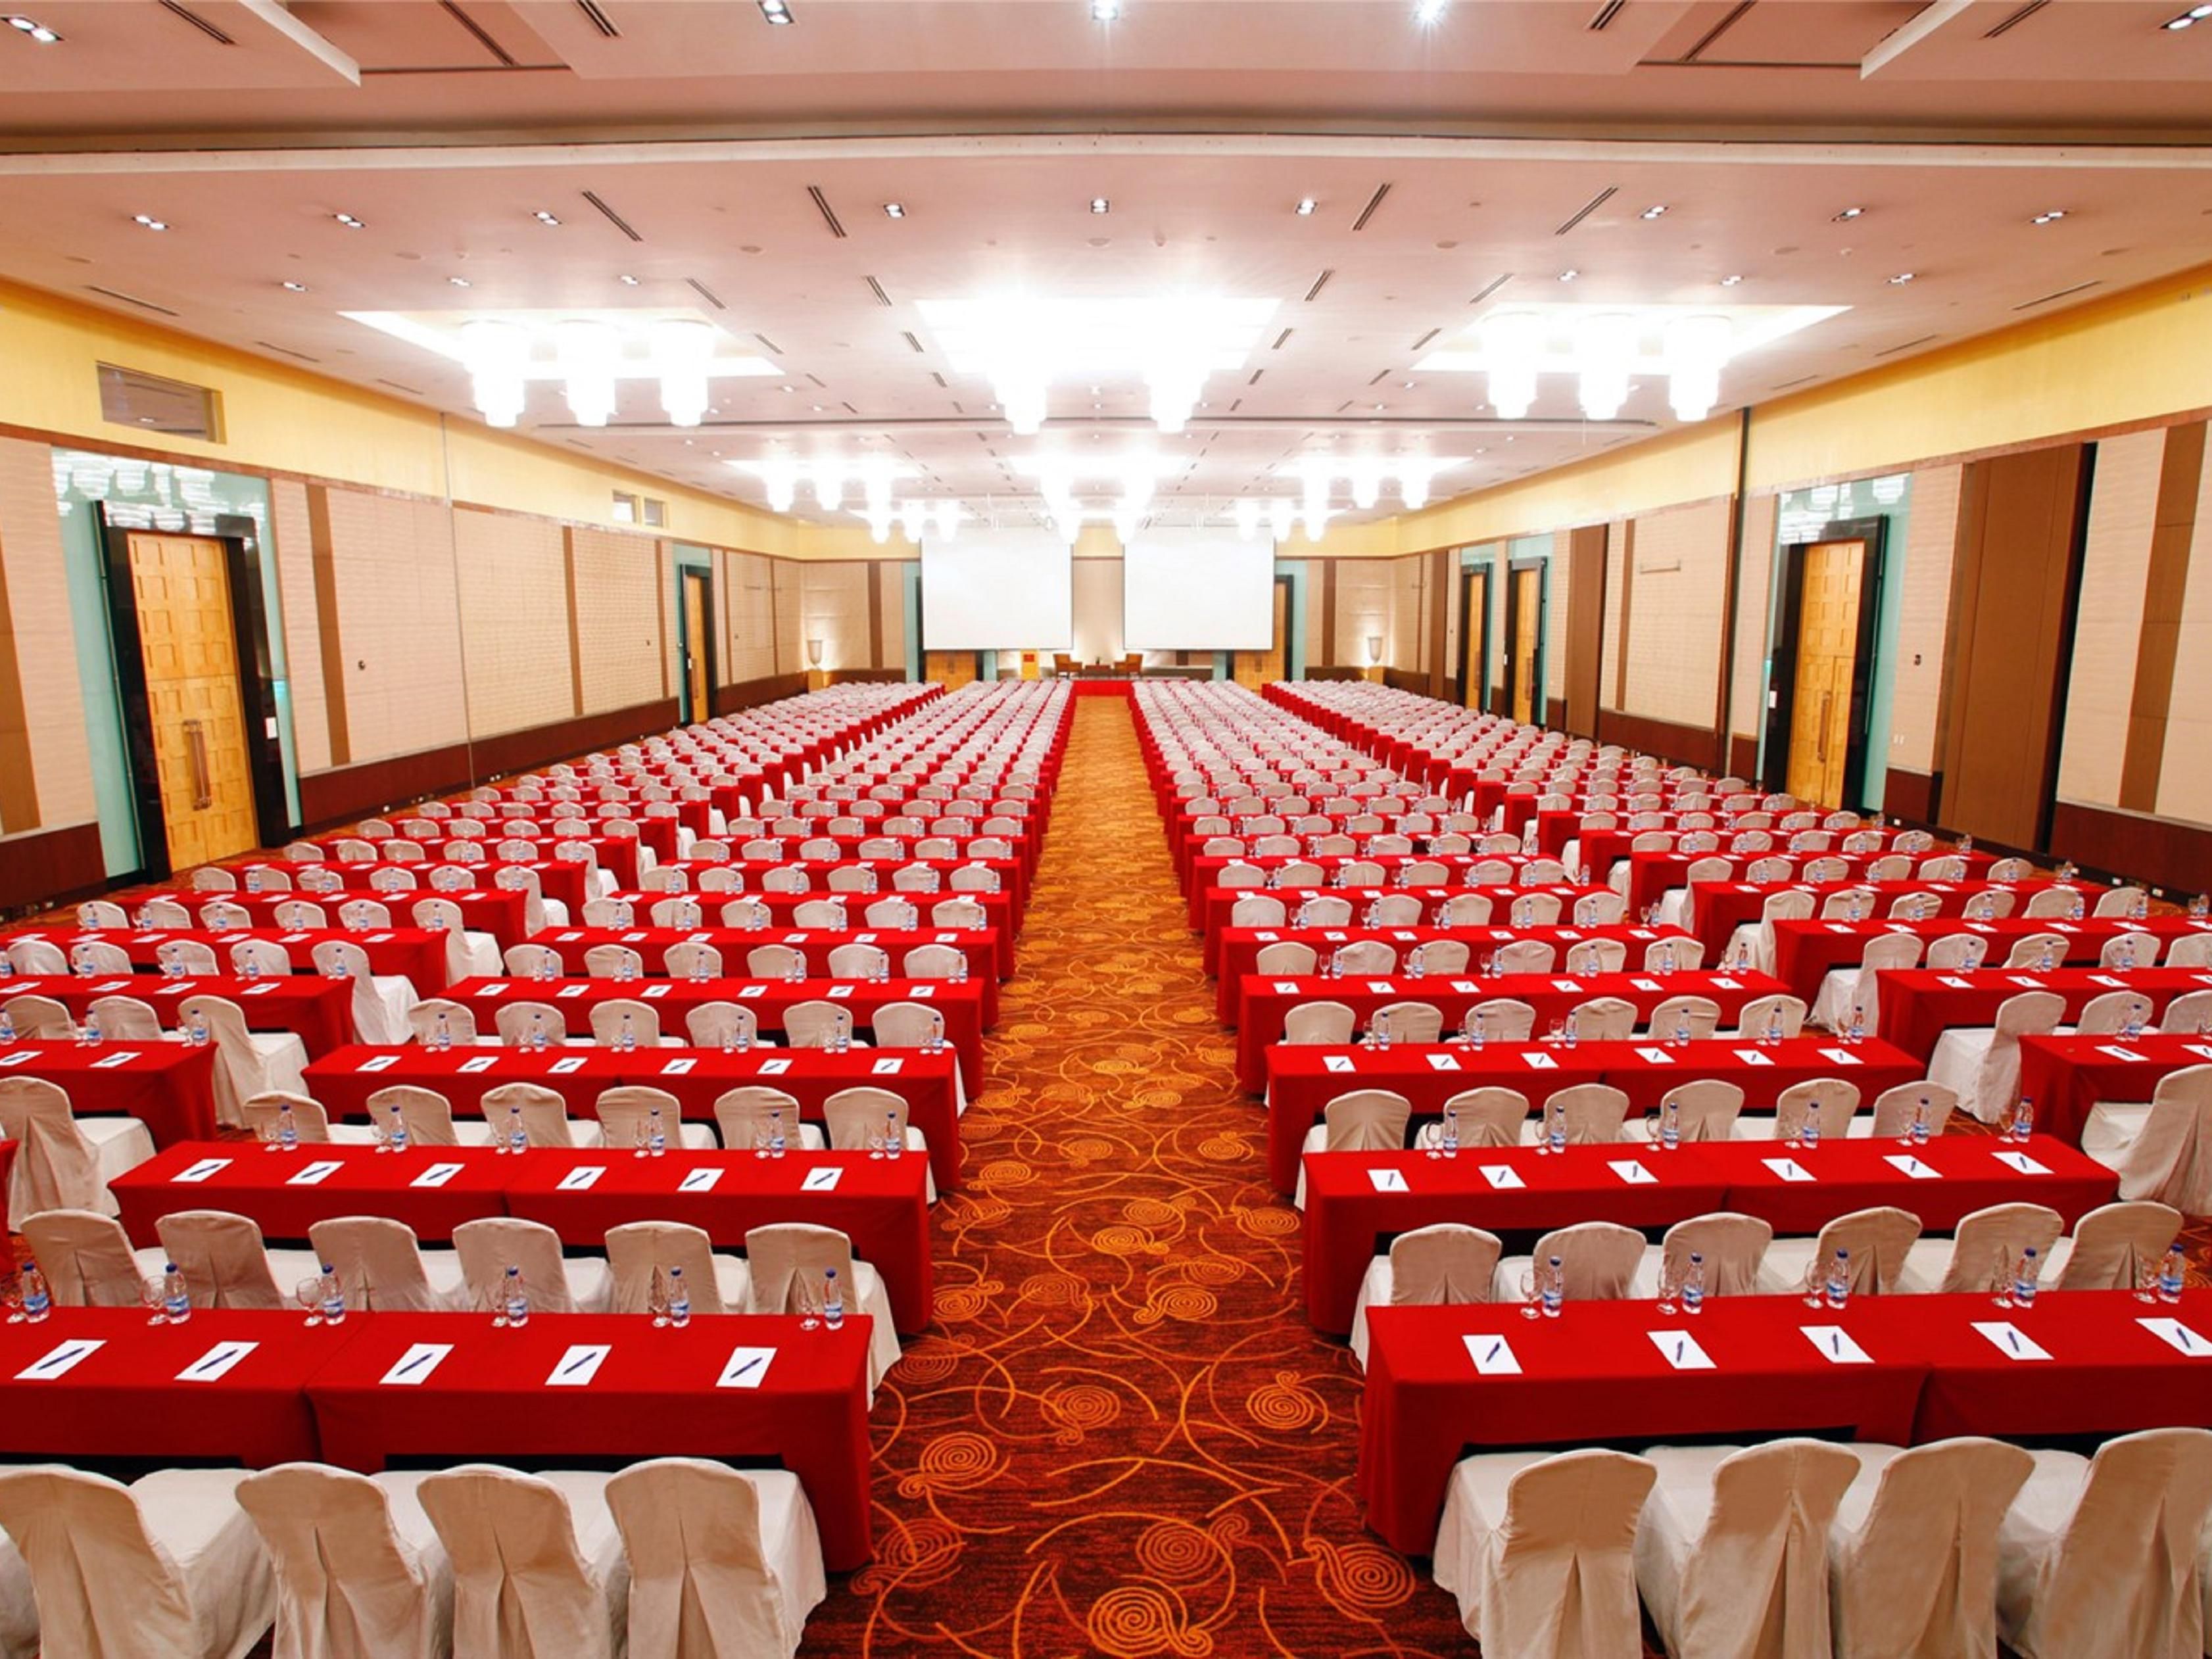 With a great venue and number of meeting rooms to choose from, Holiday Inn can accommodate your needs to arrange meetings, functions and seminars, all alike. Sharing around 34,000 square feet of meetings space across one single floor, we are more than ready to help you plan and deliver a seamless service for your event needs!